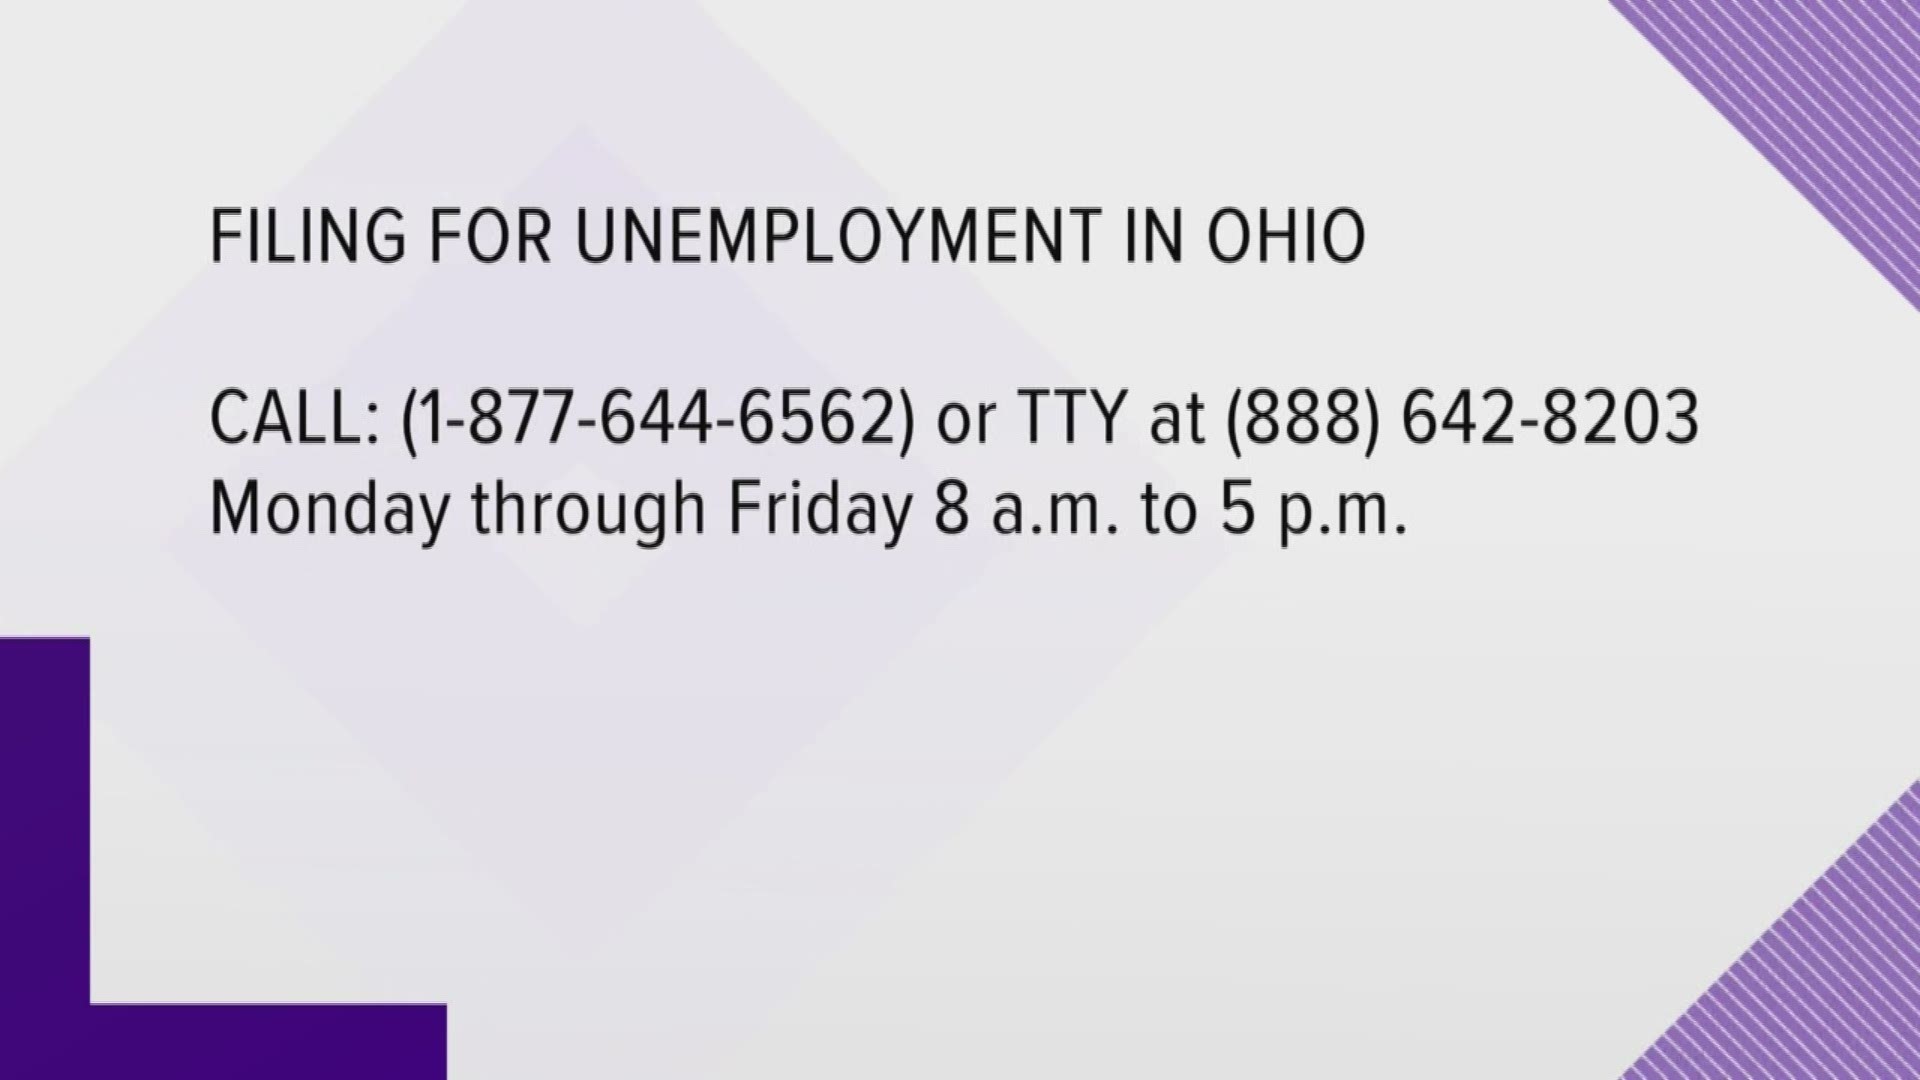 Ohio is experiencing heavy call volumes with over 110,000 new cases filed this week. If you have technical issues, don't panic, try again later.